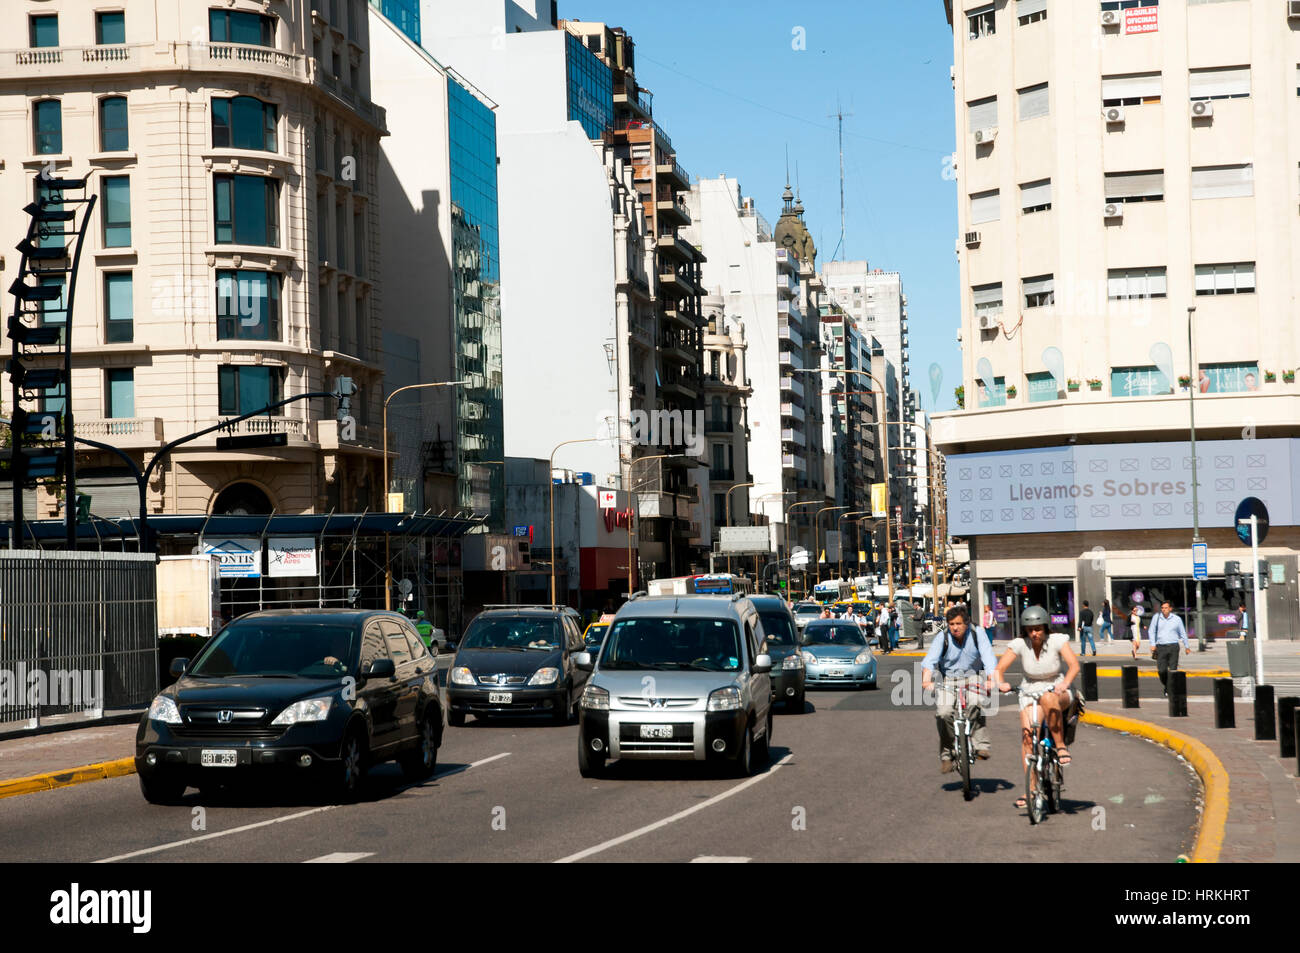 BUENOS AIRES, ARGENTINA - December 15, 2016: City life near Plaza Republica in the Argentine capital city Stock Photo